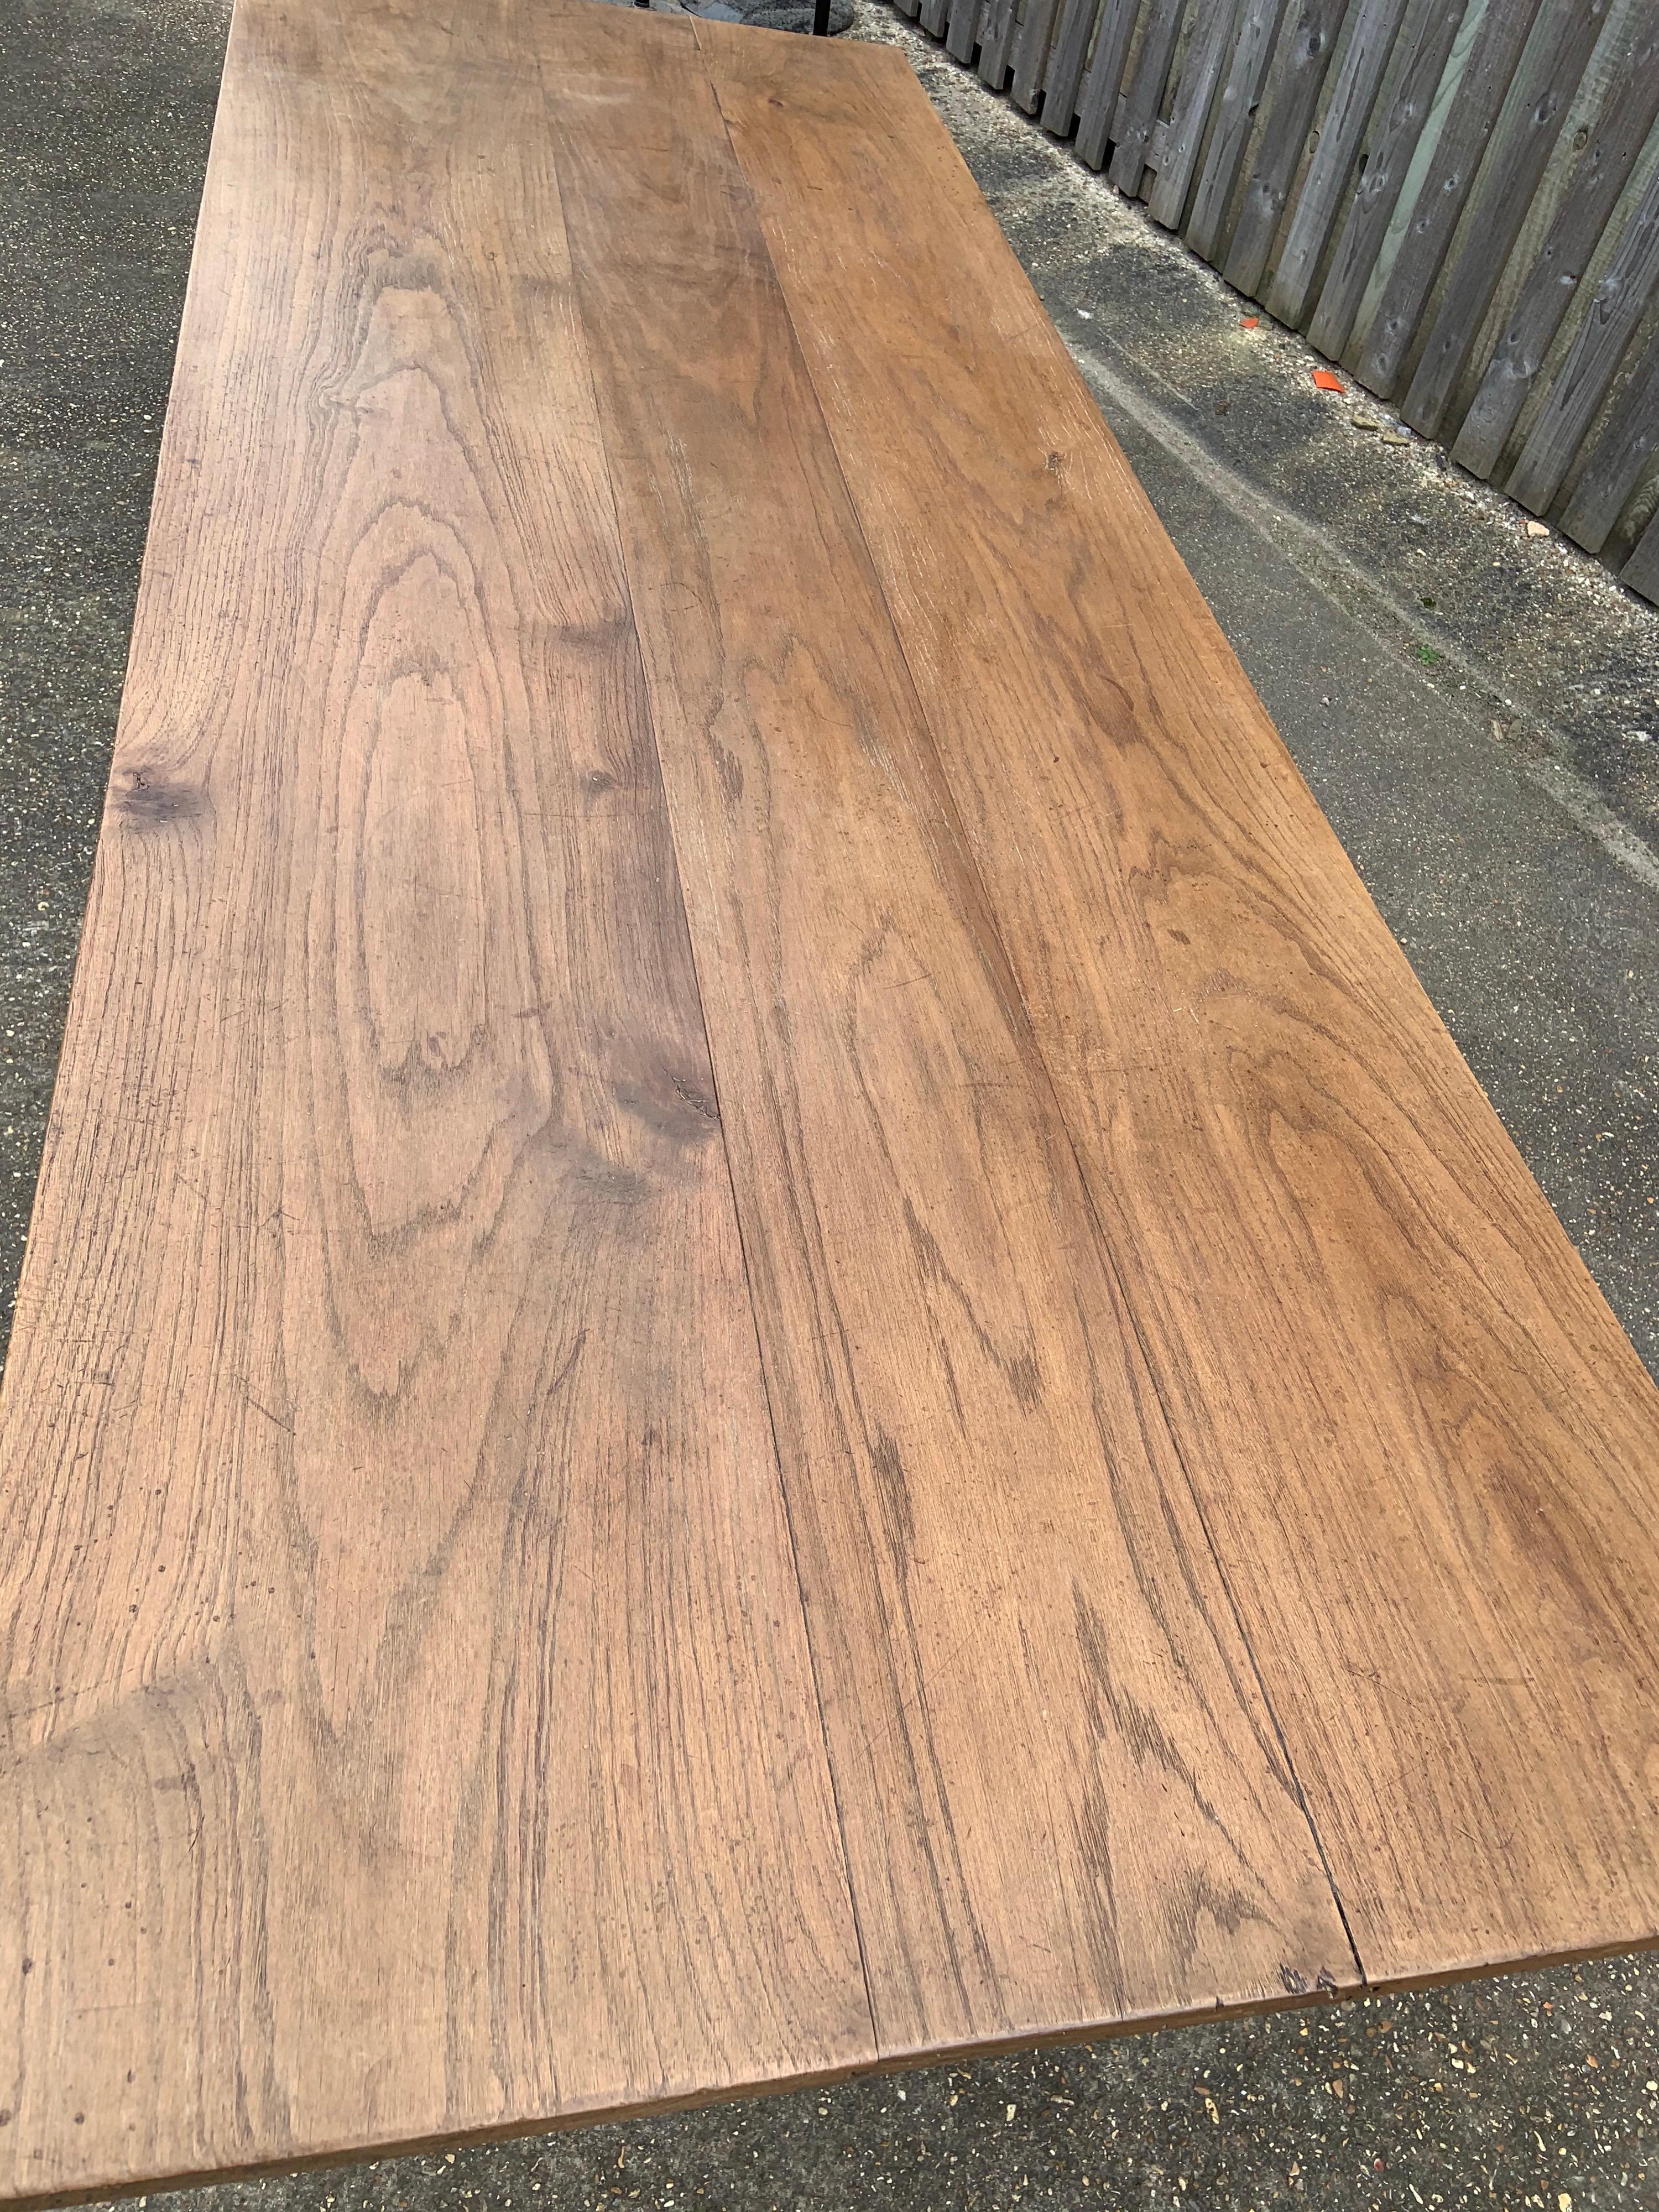 19th century elm farmhouse table with square legs and wide three plank top. Stunning color and patination.